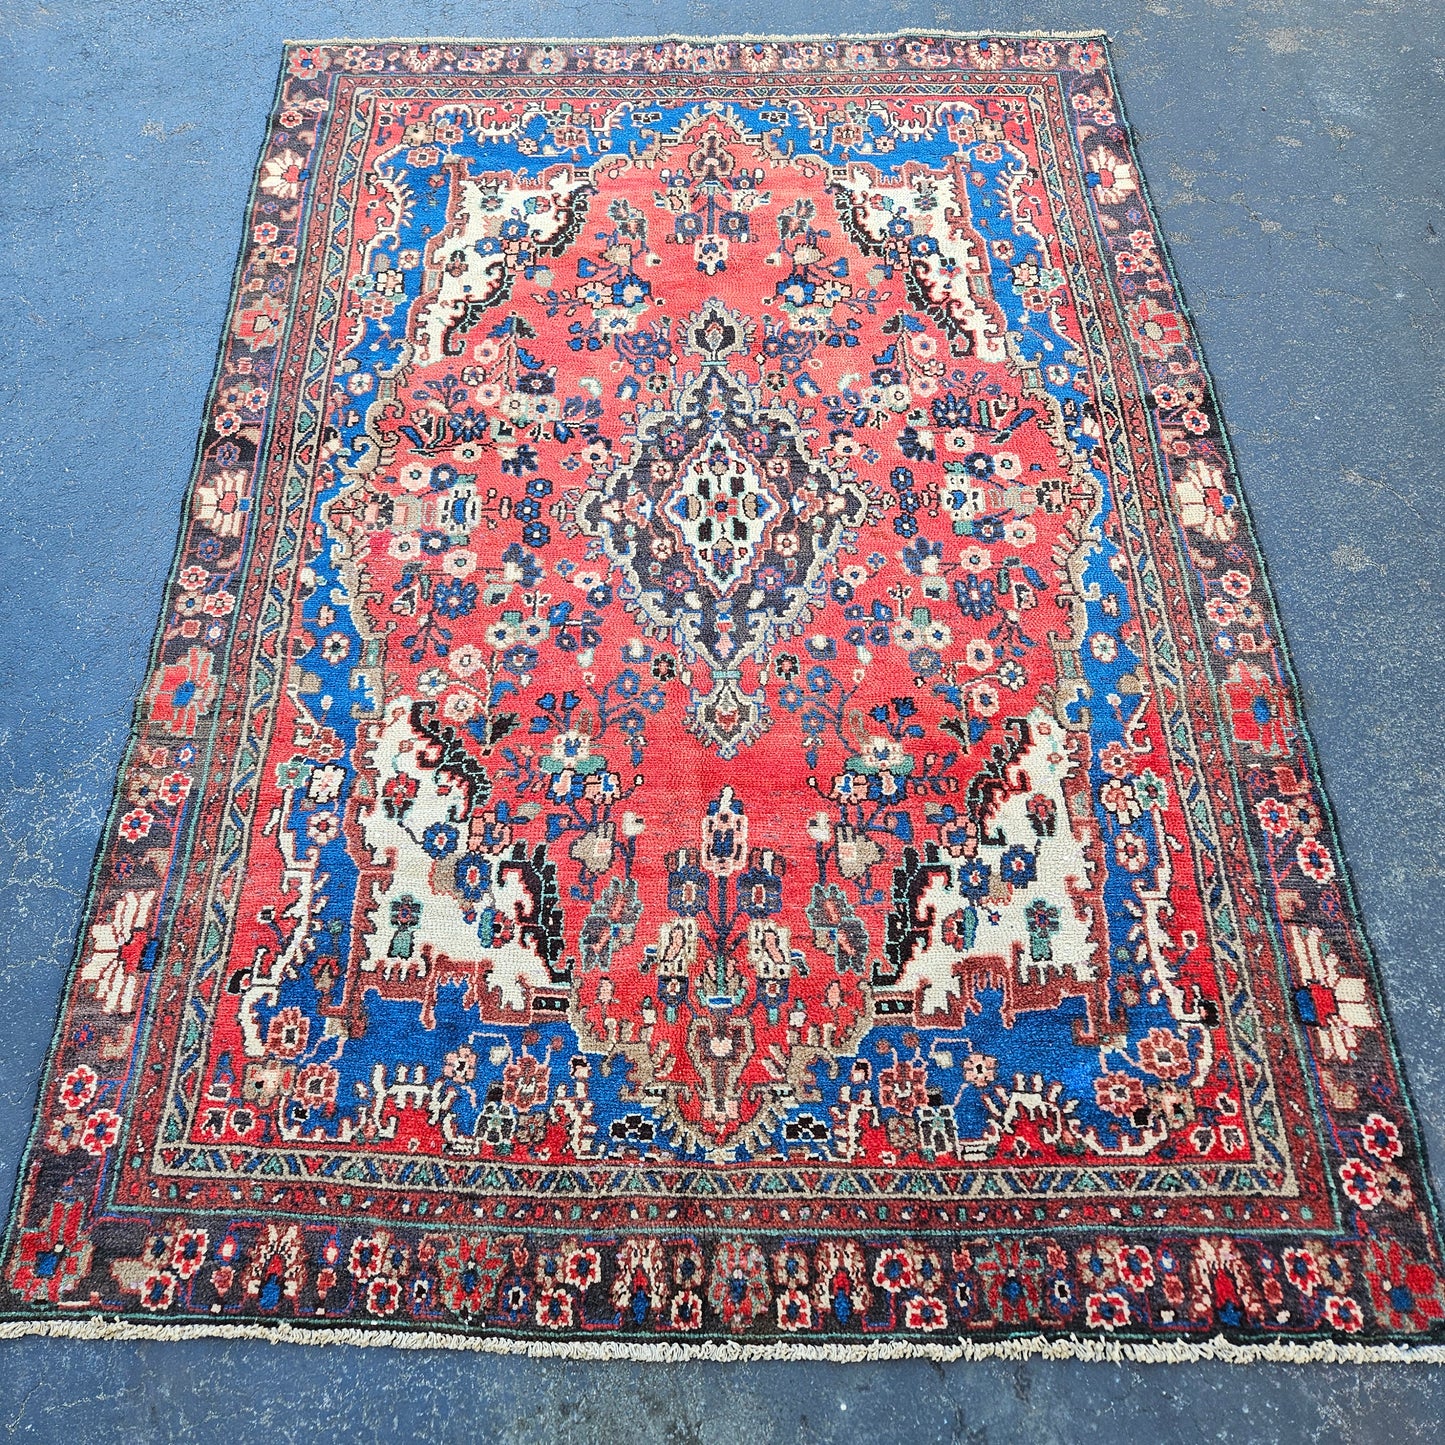 Antique 100% Wool Hand Knotted Red Rug / Carpet - 6' 4" x 9' 2"